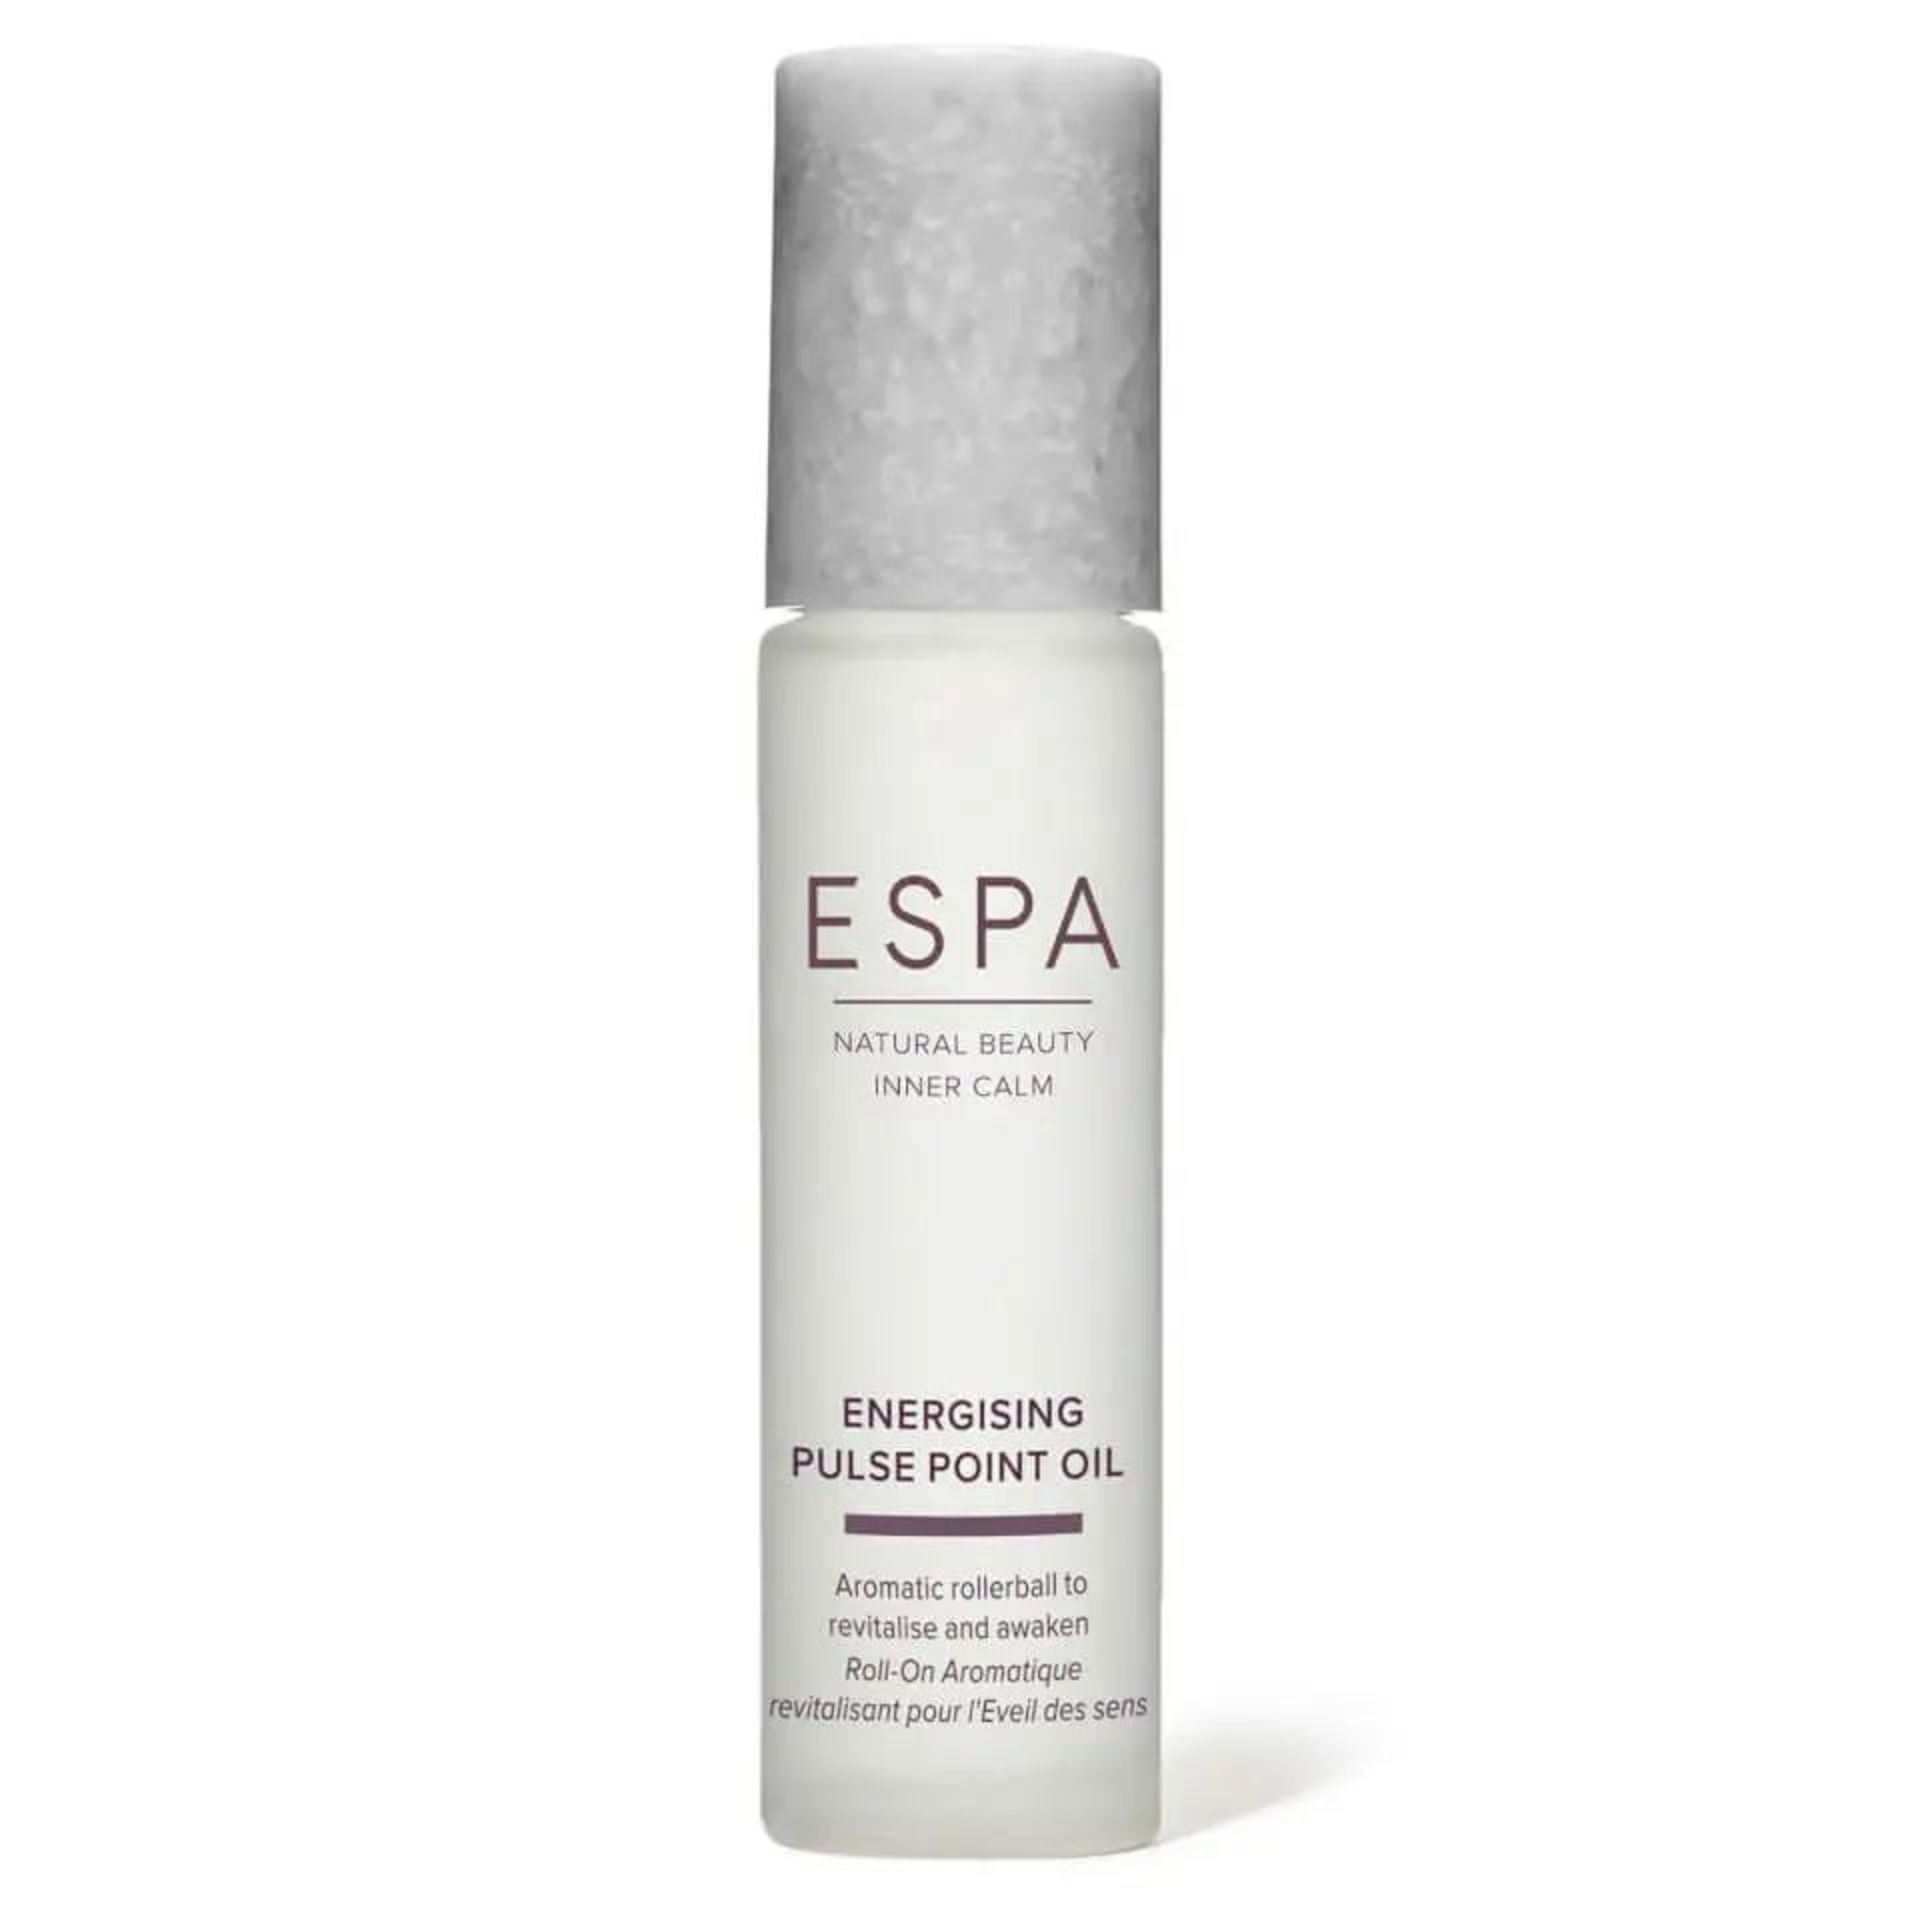 10 X NEW Espa Energising Pulse Point Oil. 9ML. RRP £23 EACH. A revitalising and zesty oil for use